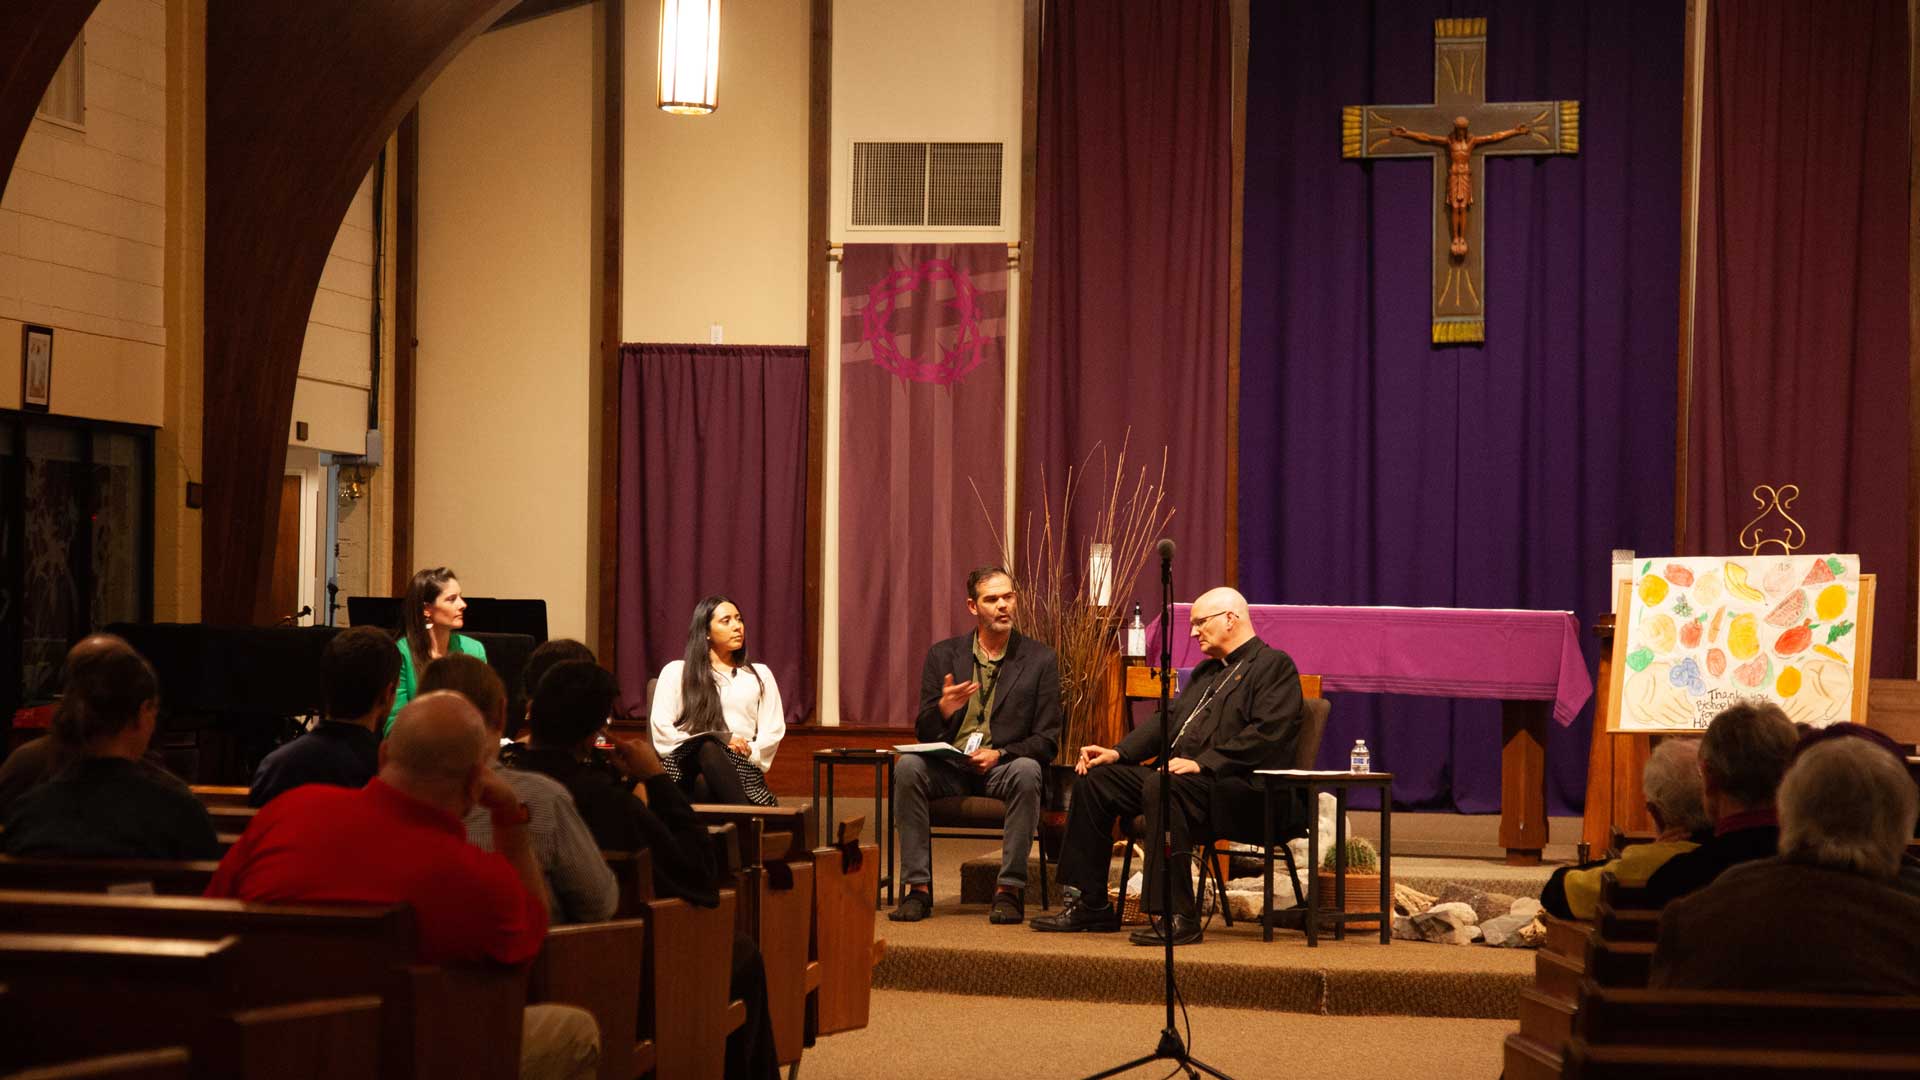 Bishop Weisenburger and Catholic leaders champion environmental justice in panel discussion